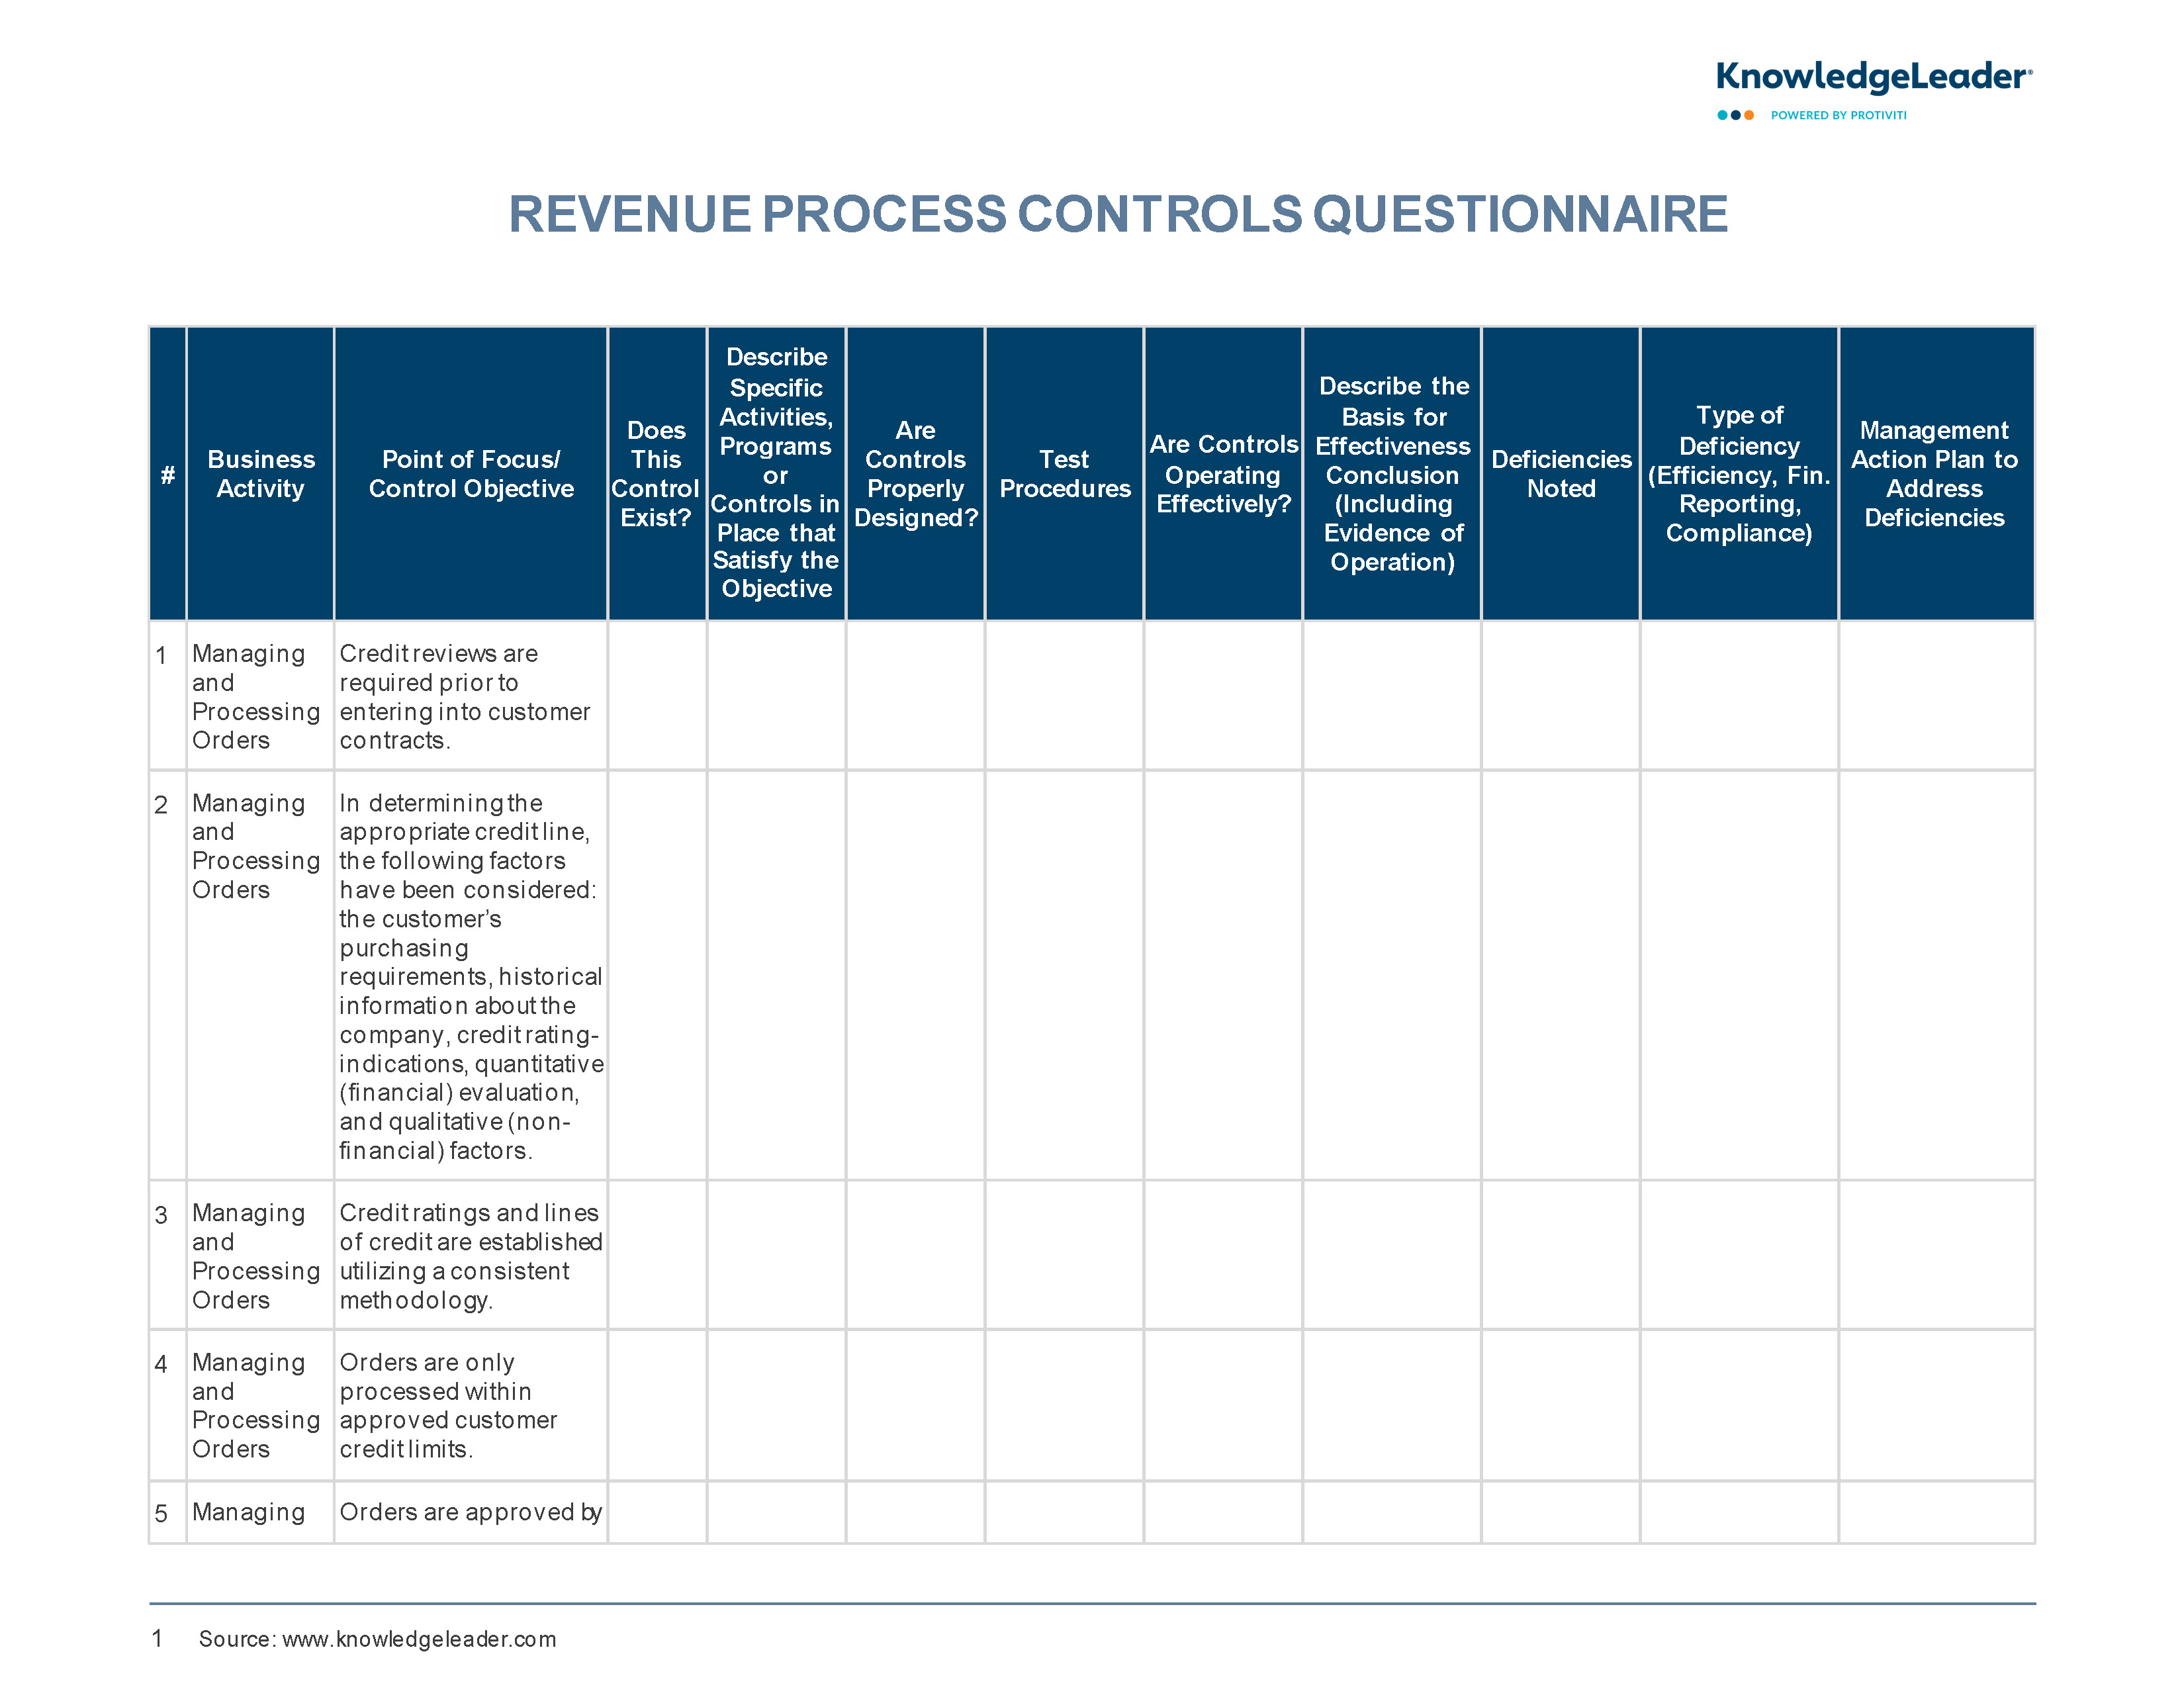 Screenshot of the first page of Revenue Process Controls Questionnaire